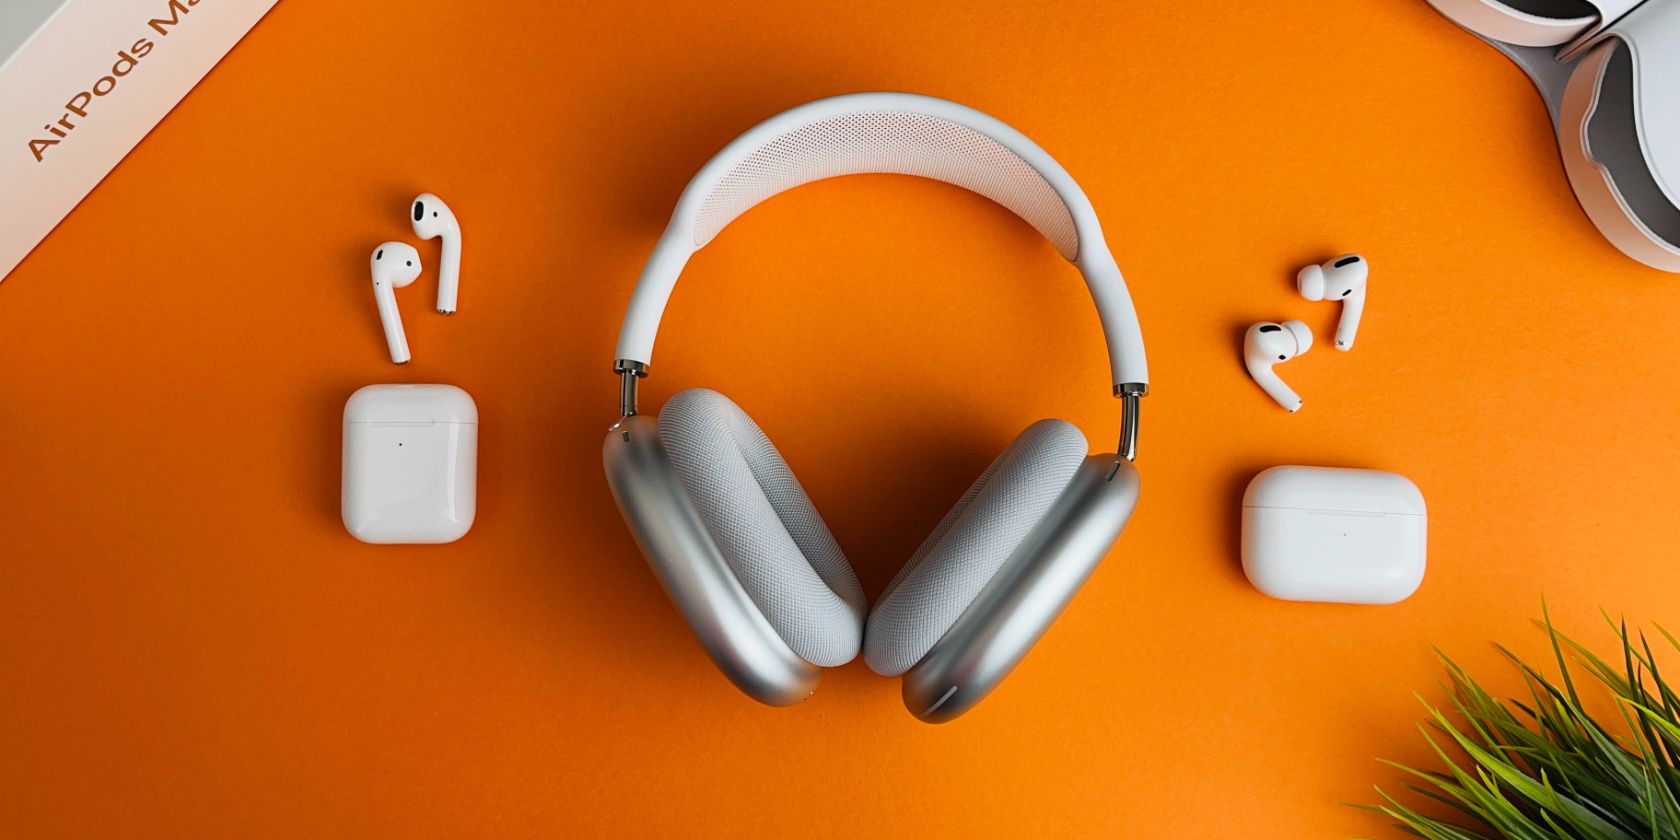 AirPods Max, AirPods, and AirPods Pro on orange background